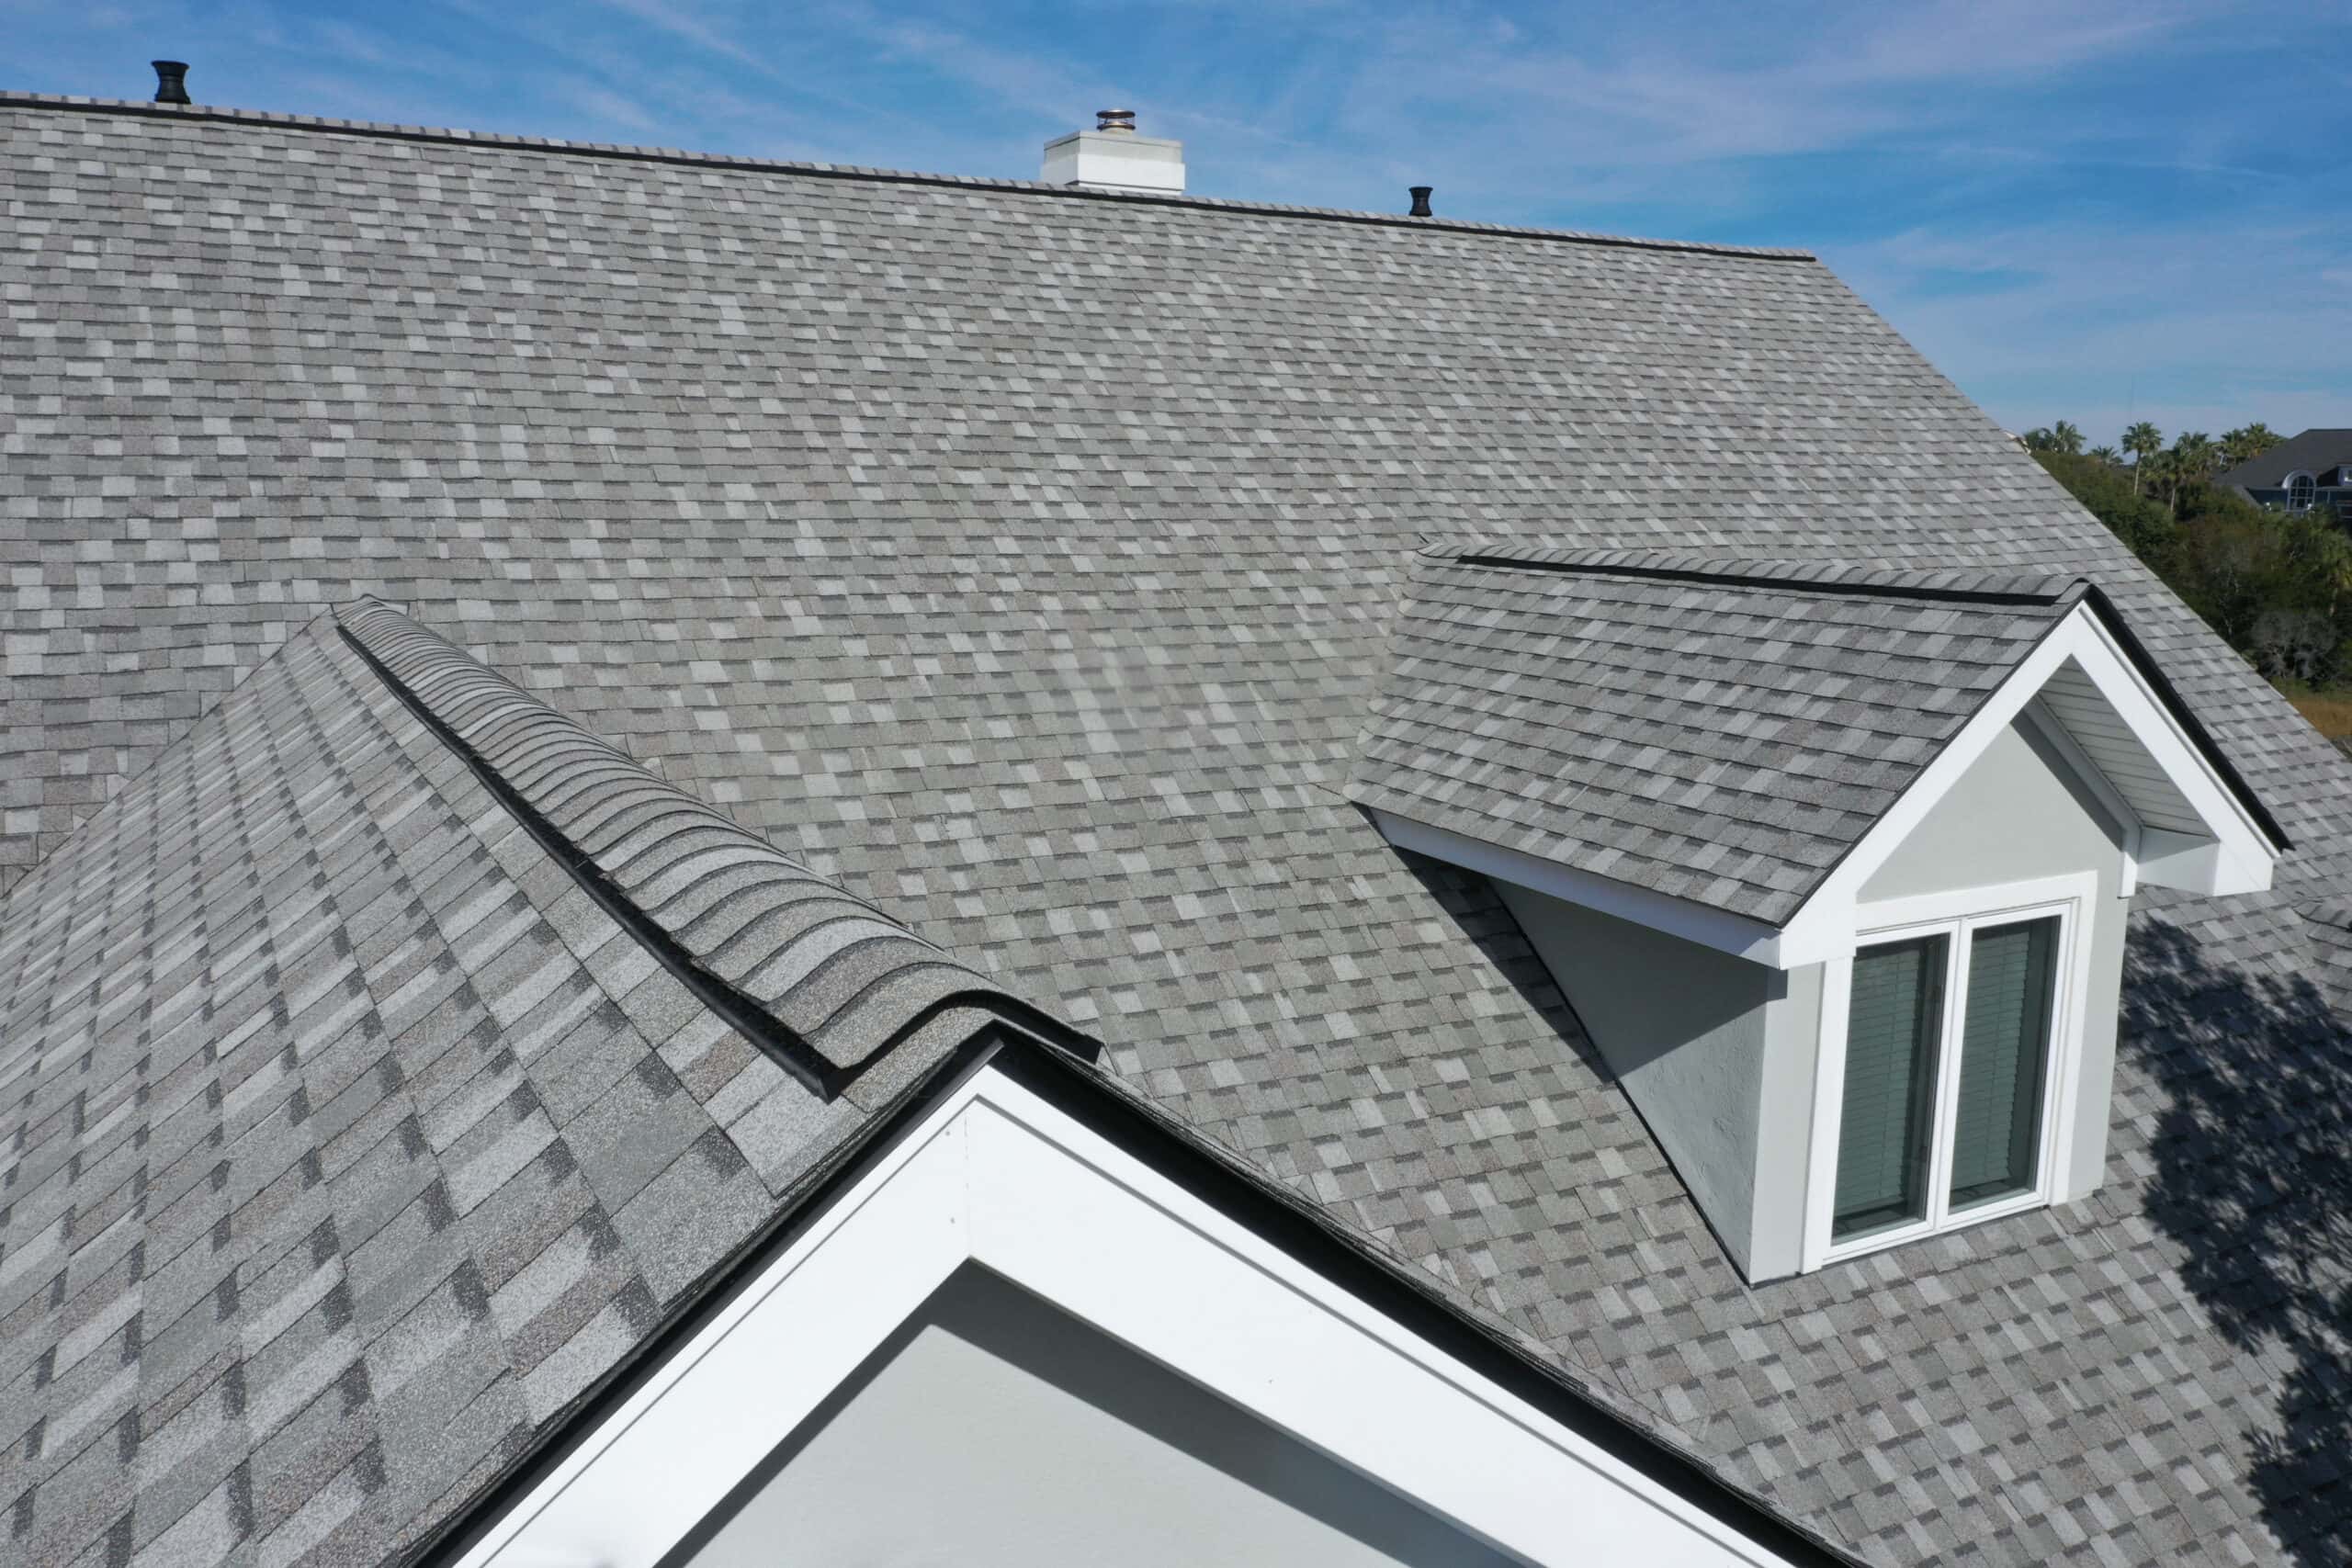 slope shingle roof - Your Site Safety Product Specialist